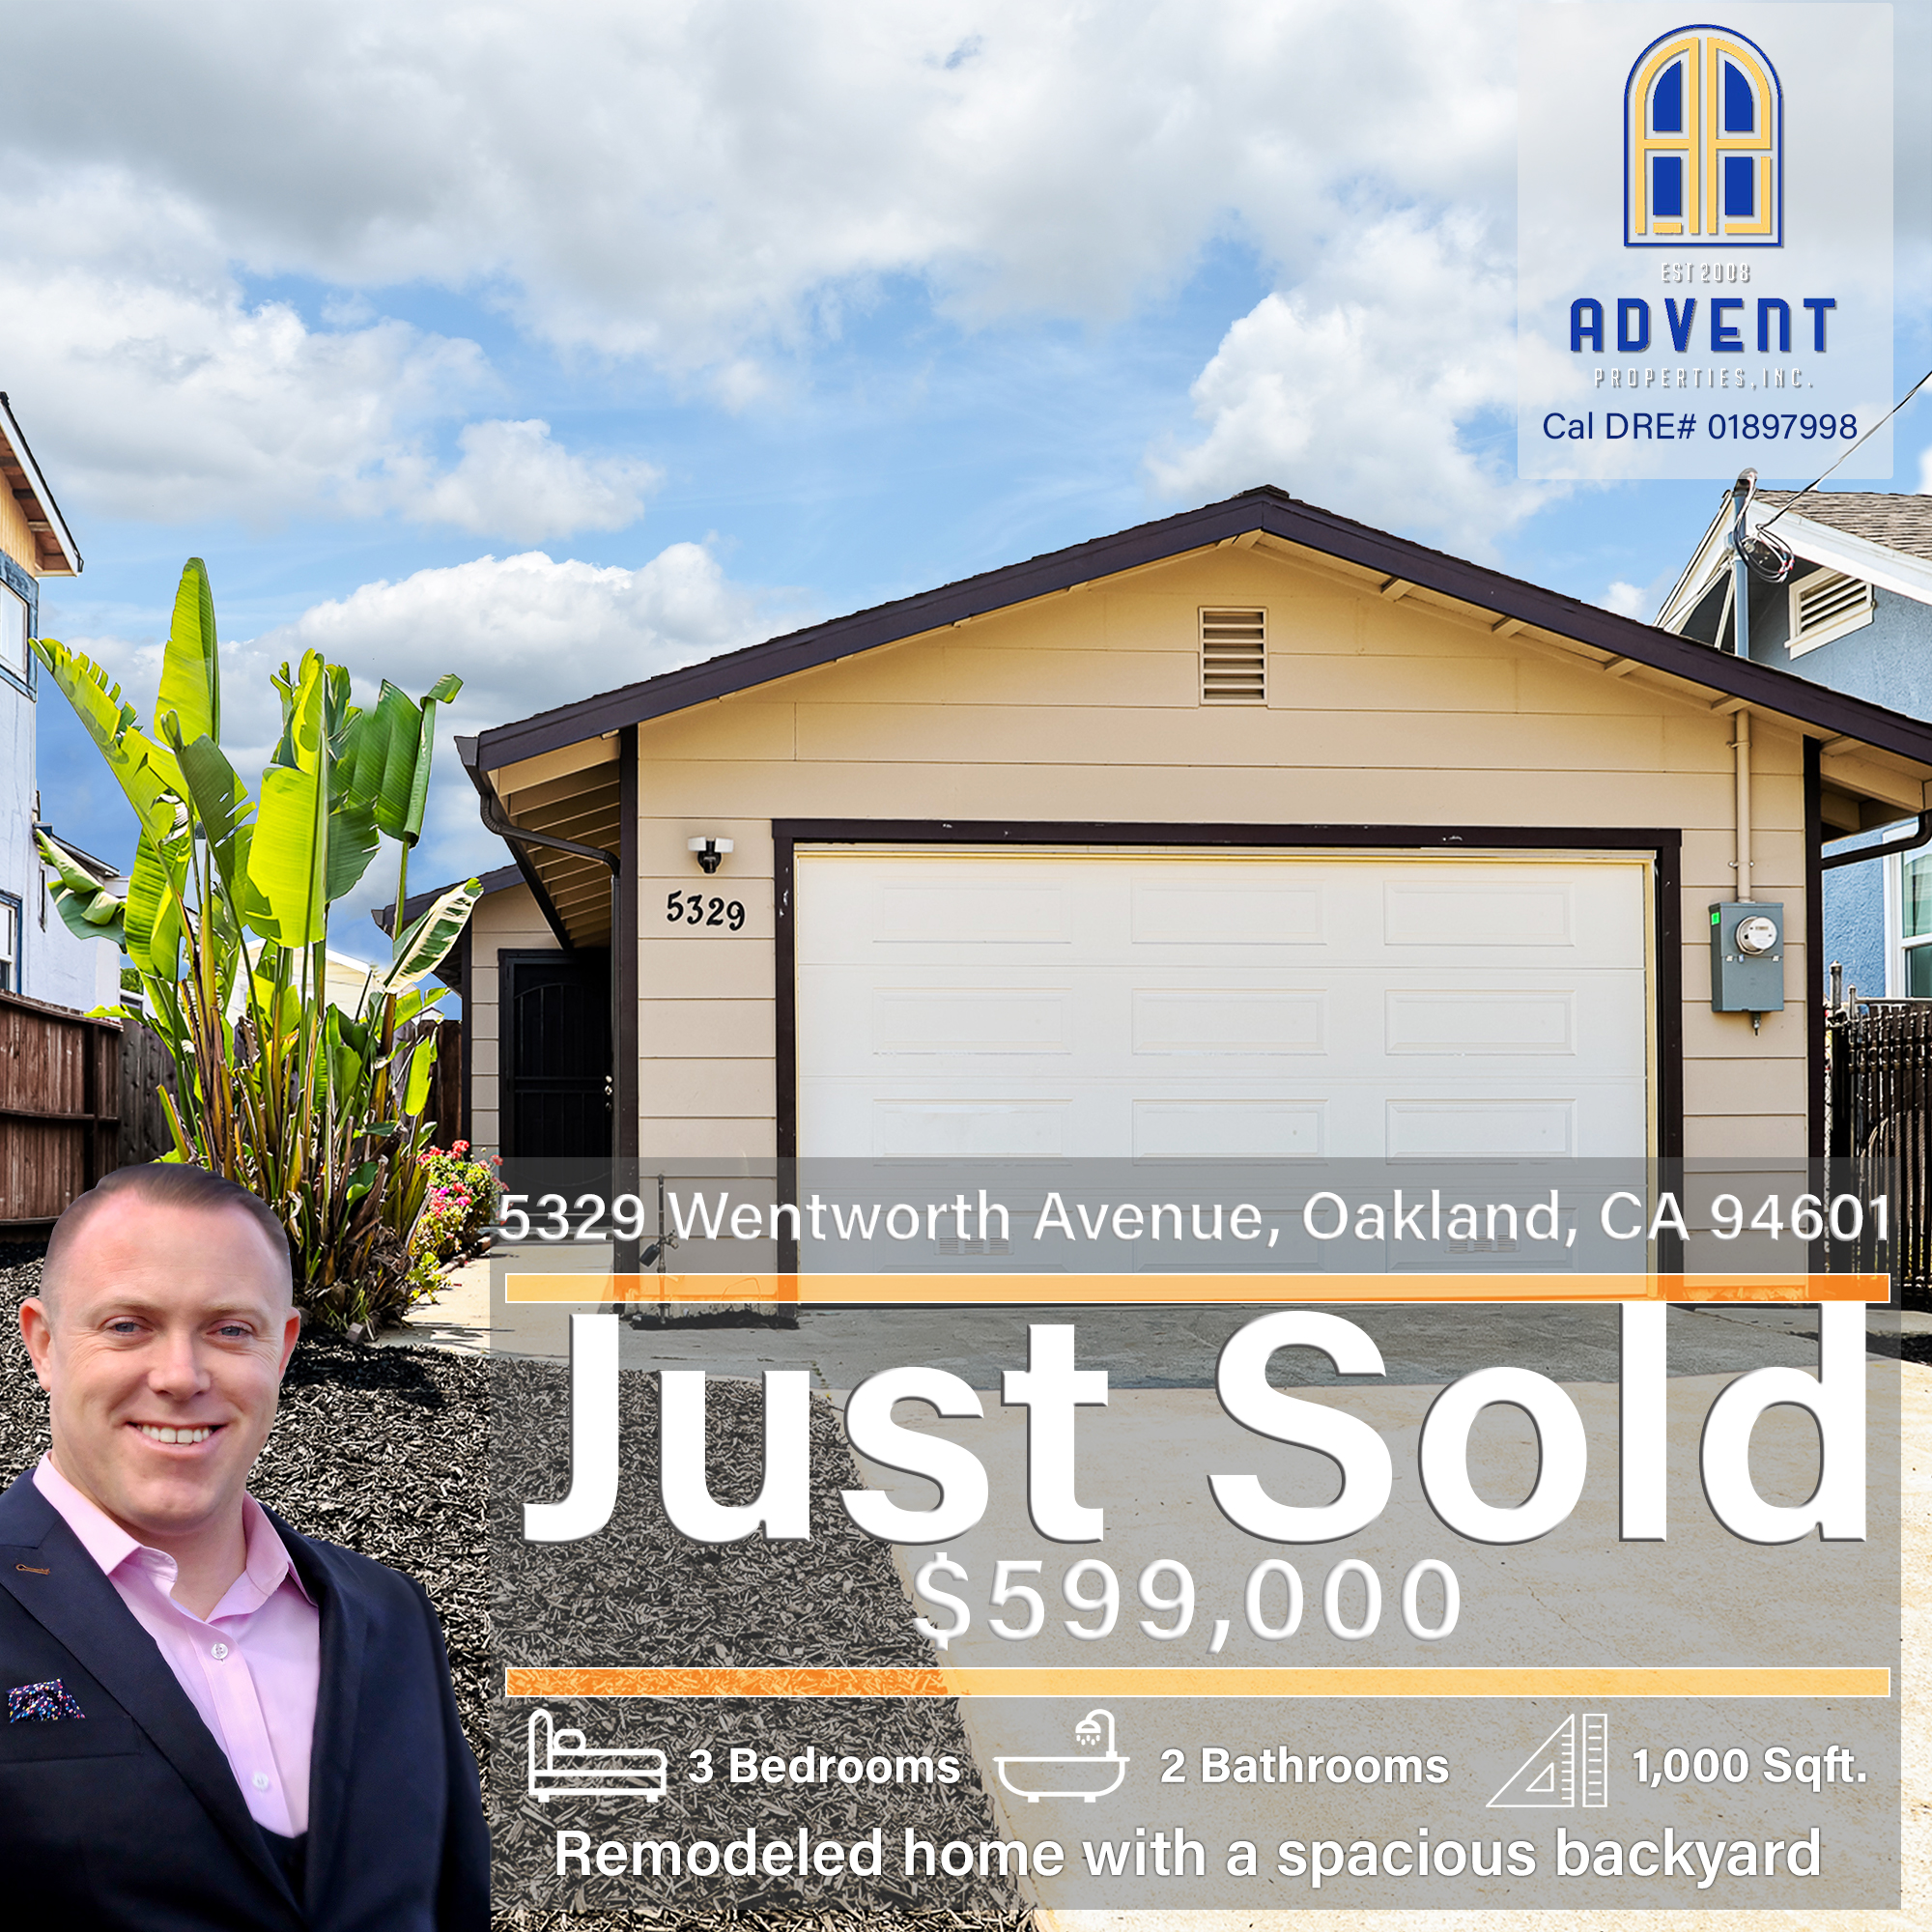 Just Sold by Darryl Glass: 5329 Wentworth Avenue, Oakland, CA 94601